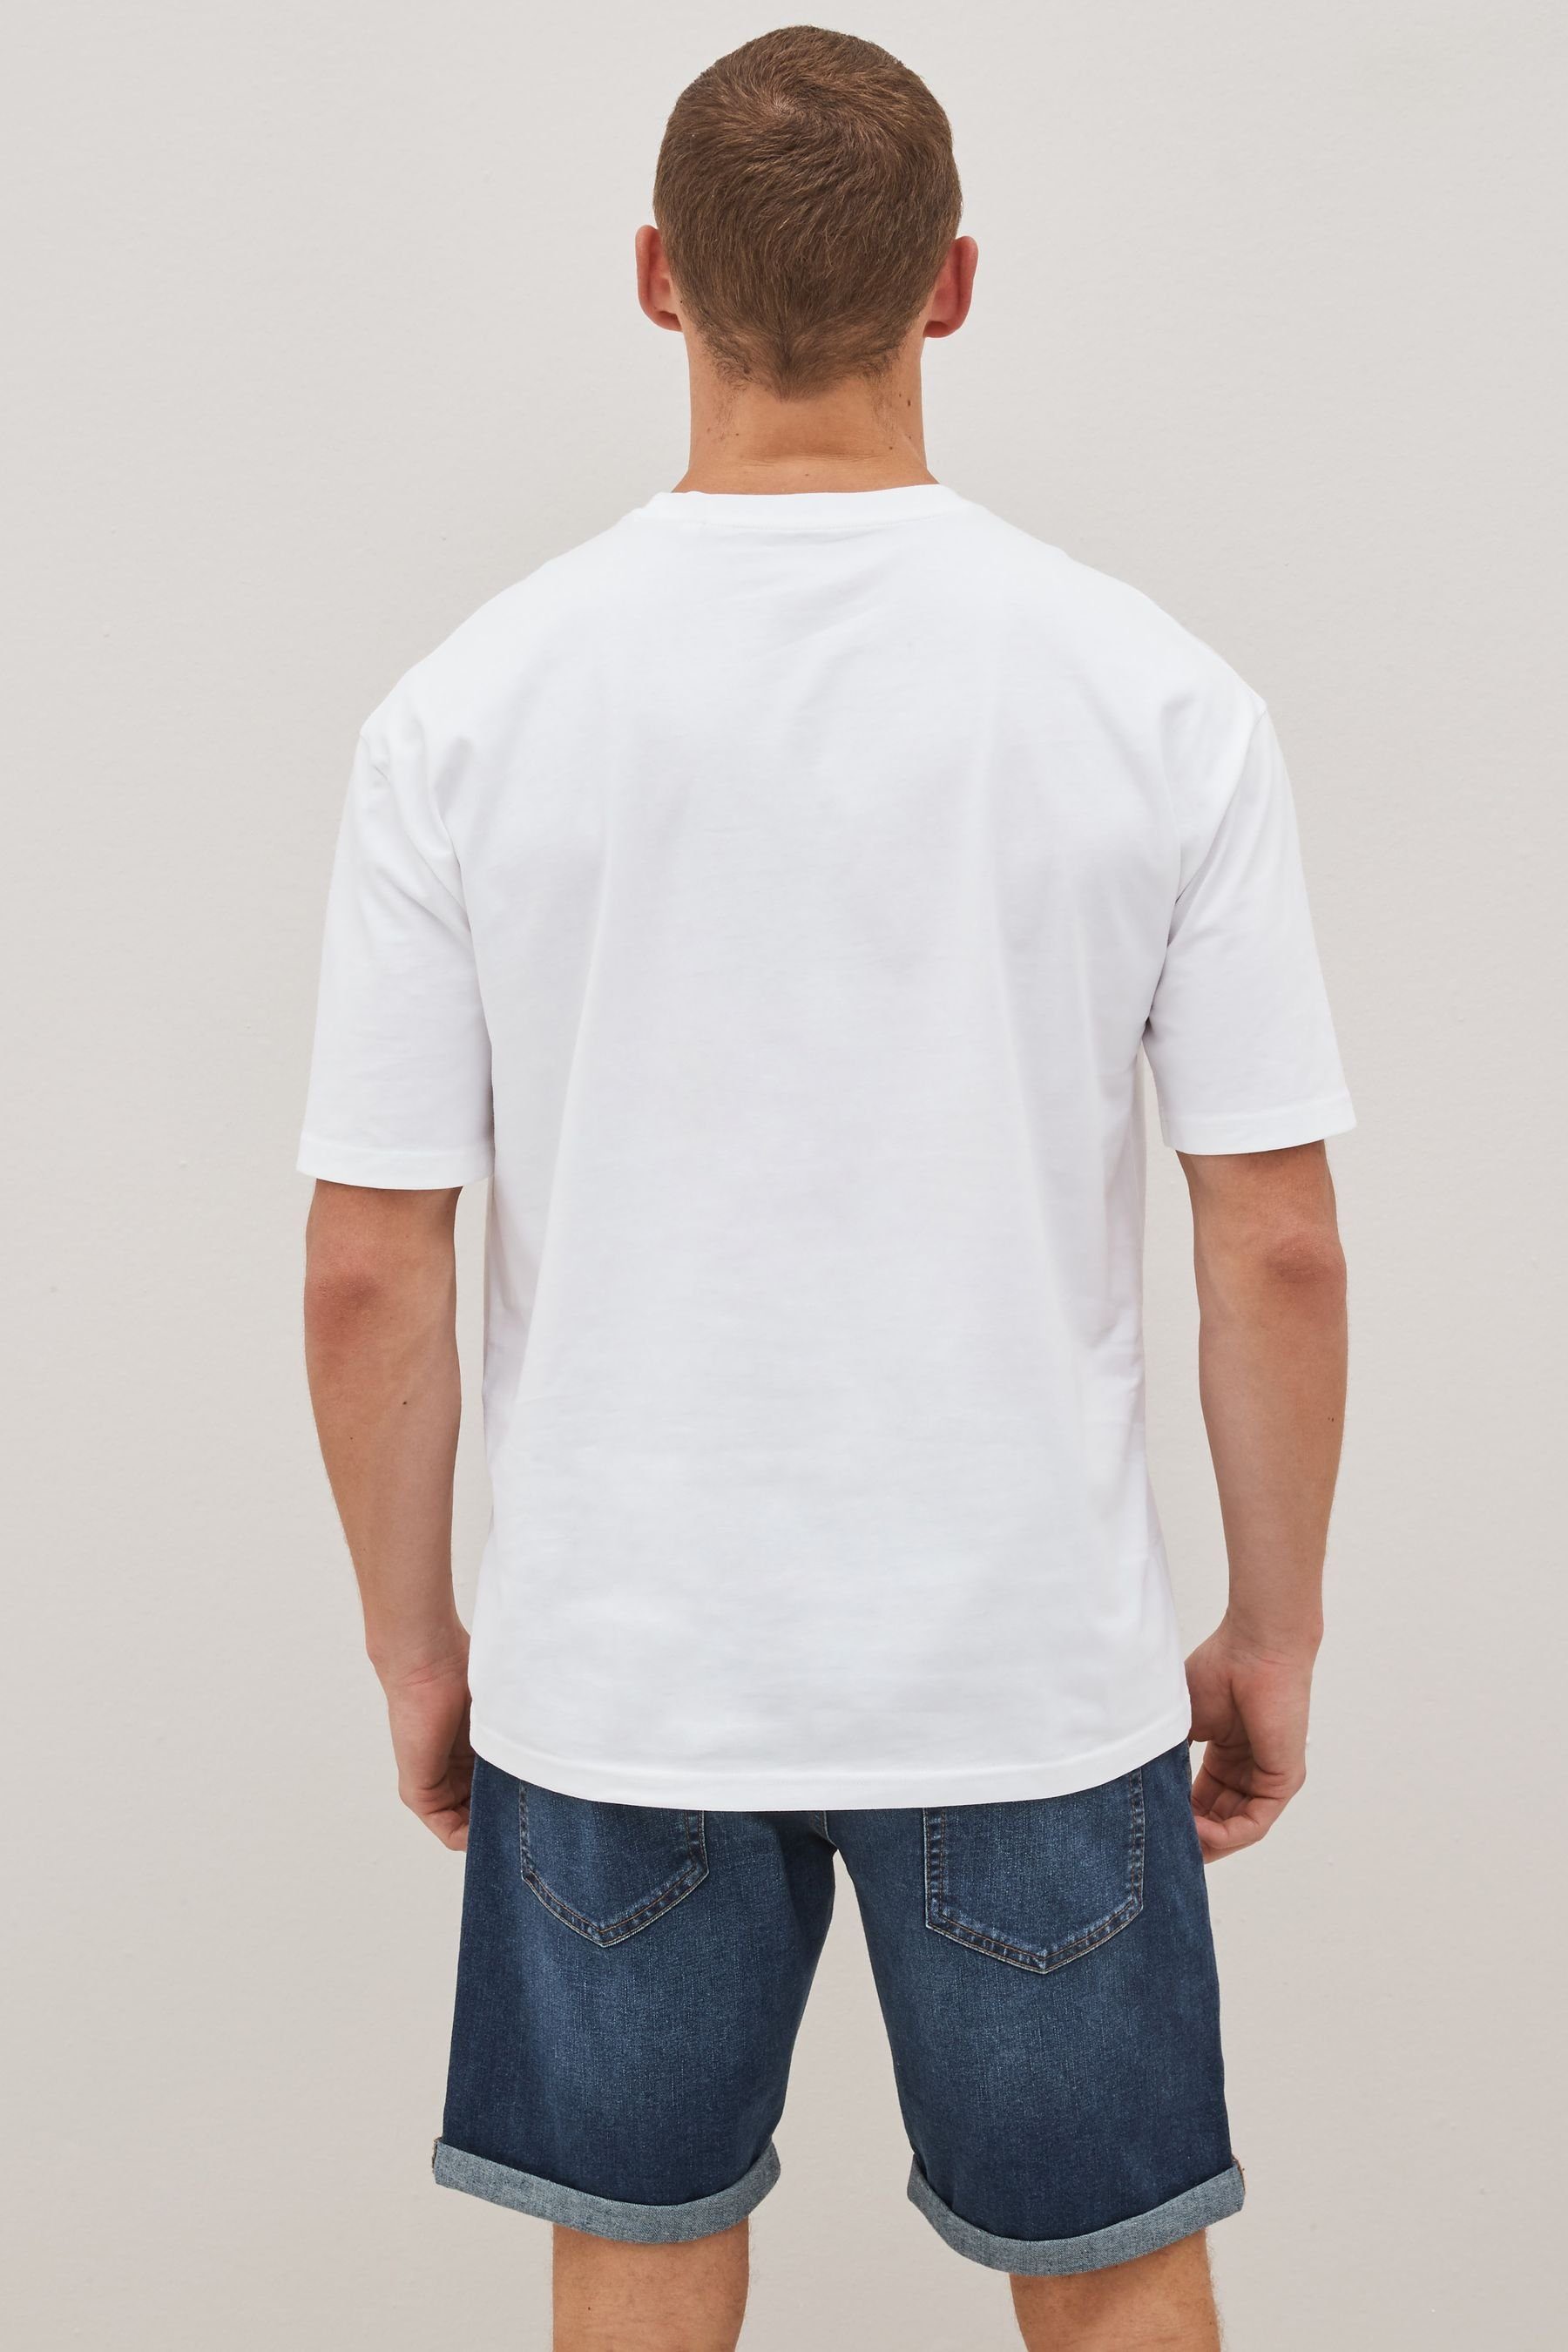 im (1-tlg) White T-Shirt Fit Next Relaxed Rundhals-T-Shirt